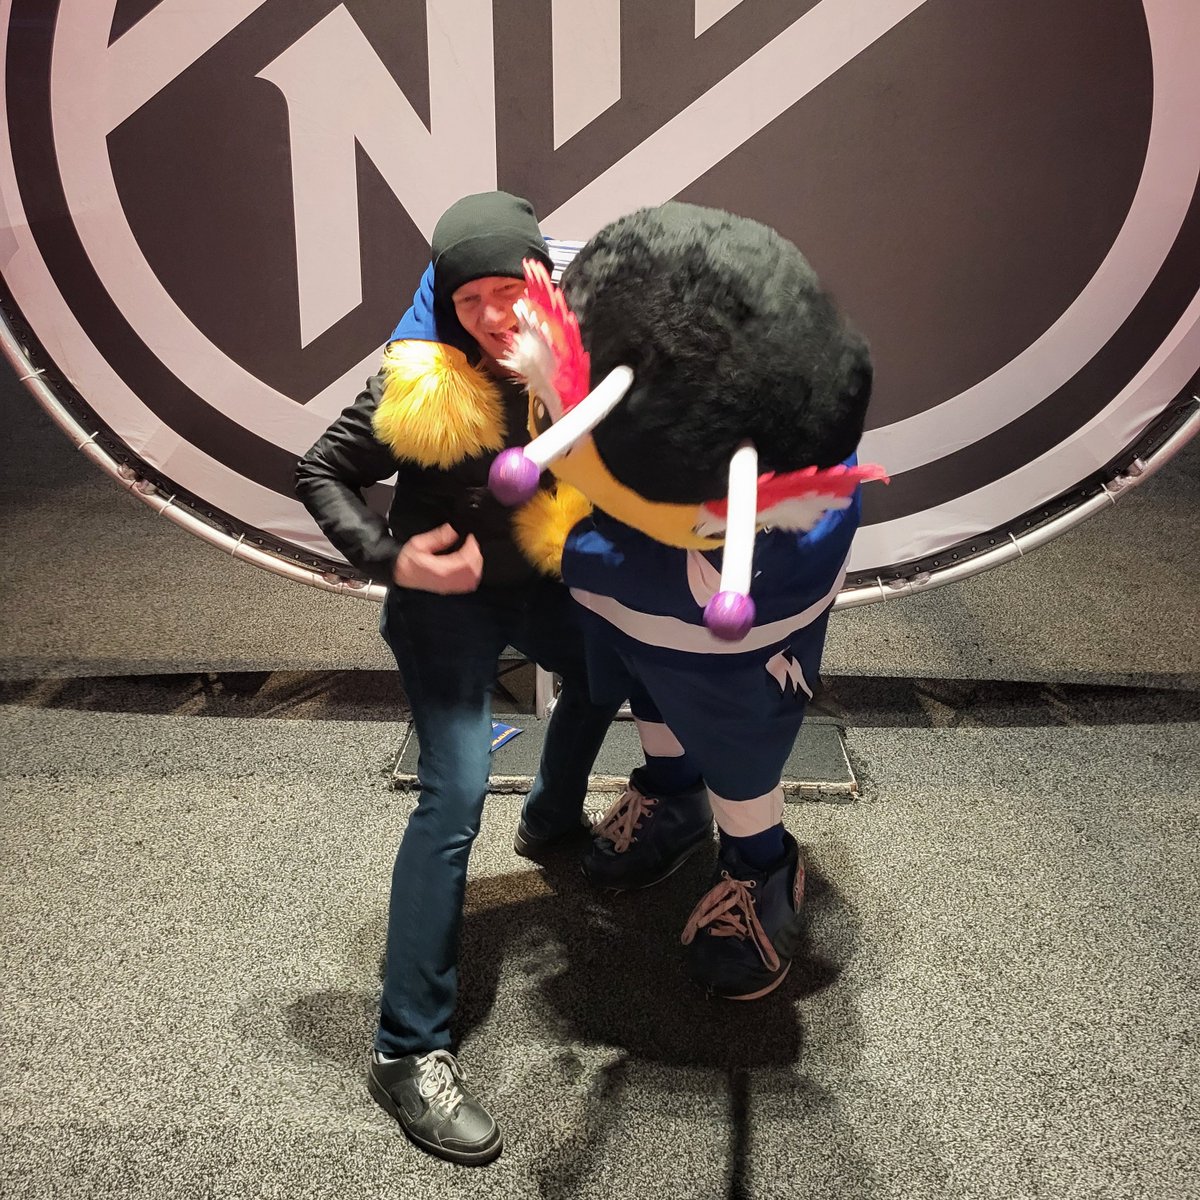 @ThunderBugTBL It was the happiest moment of my life.